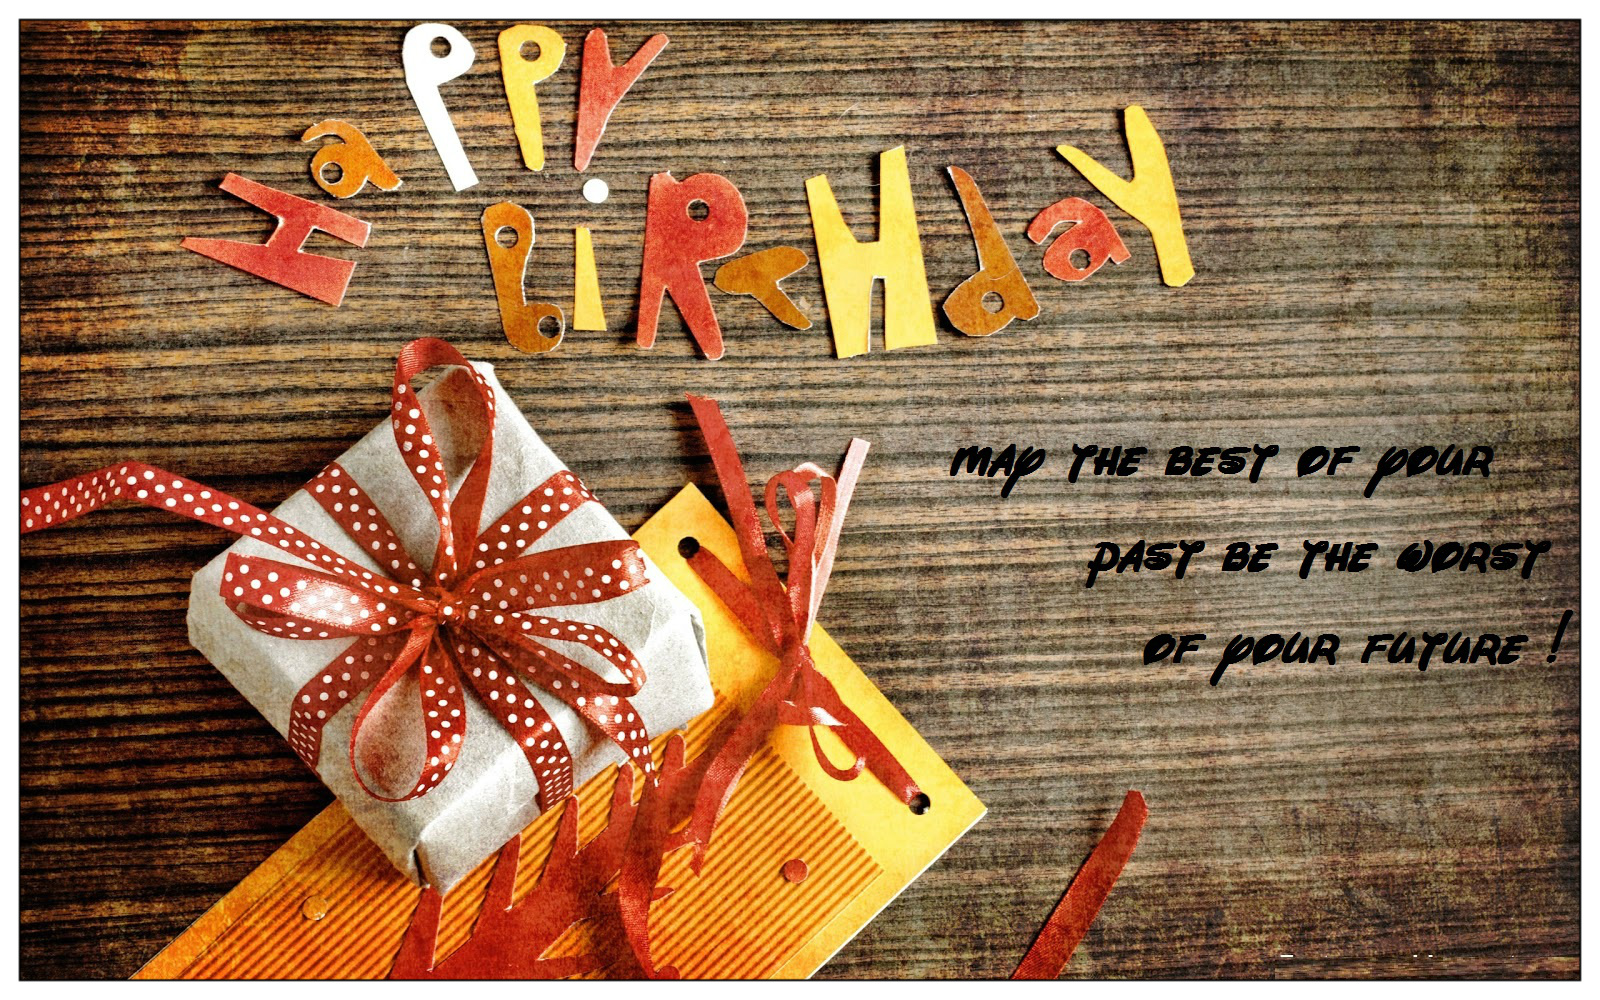 Happy Birth Day Messages Wishes Sms Quotes - Conversations